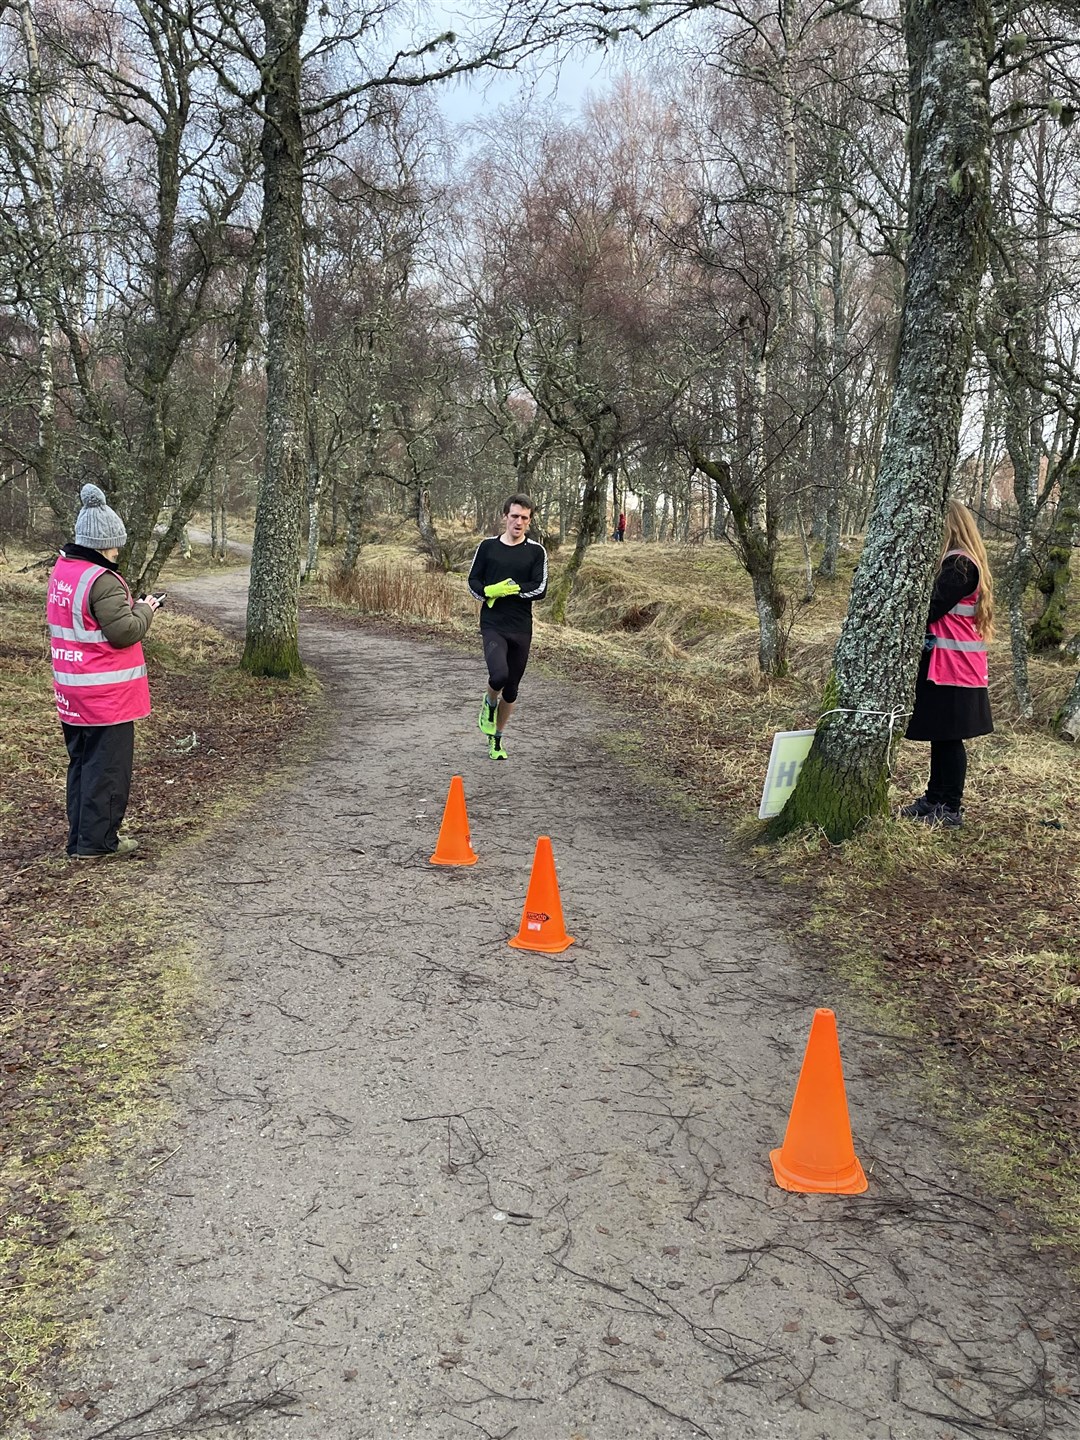 Home and dry: conditions today on the Strathspey course were just about perfect for first home Ally Bevan, one of the strath's own runners.